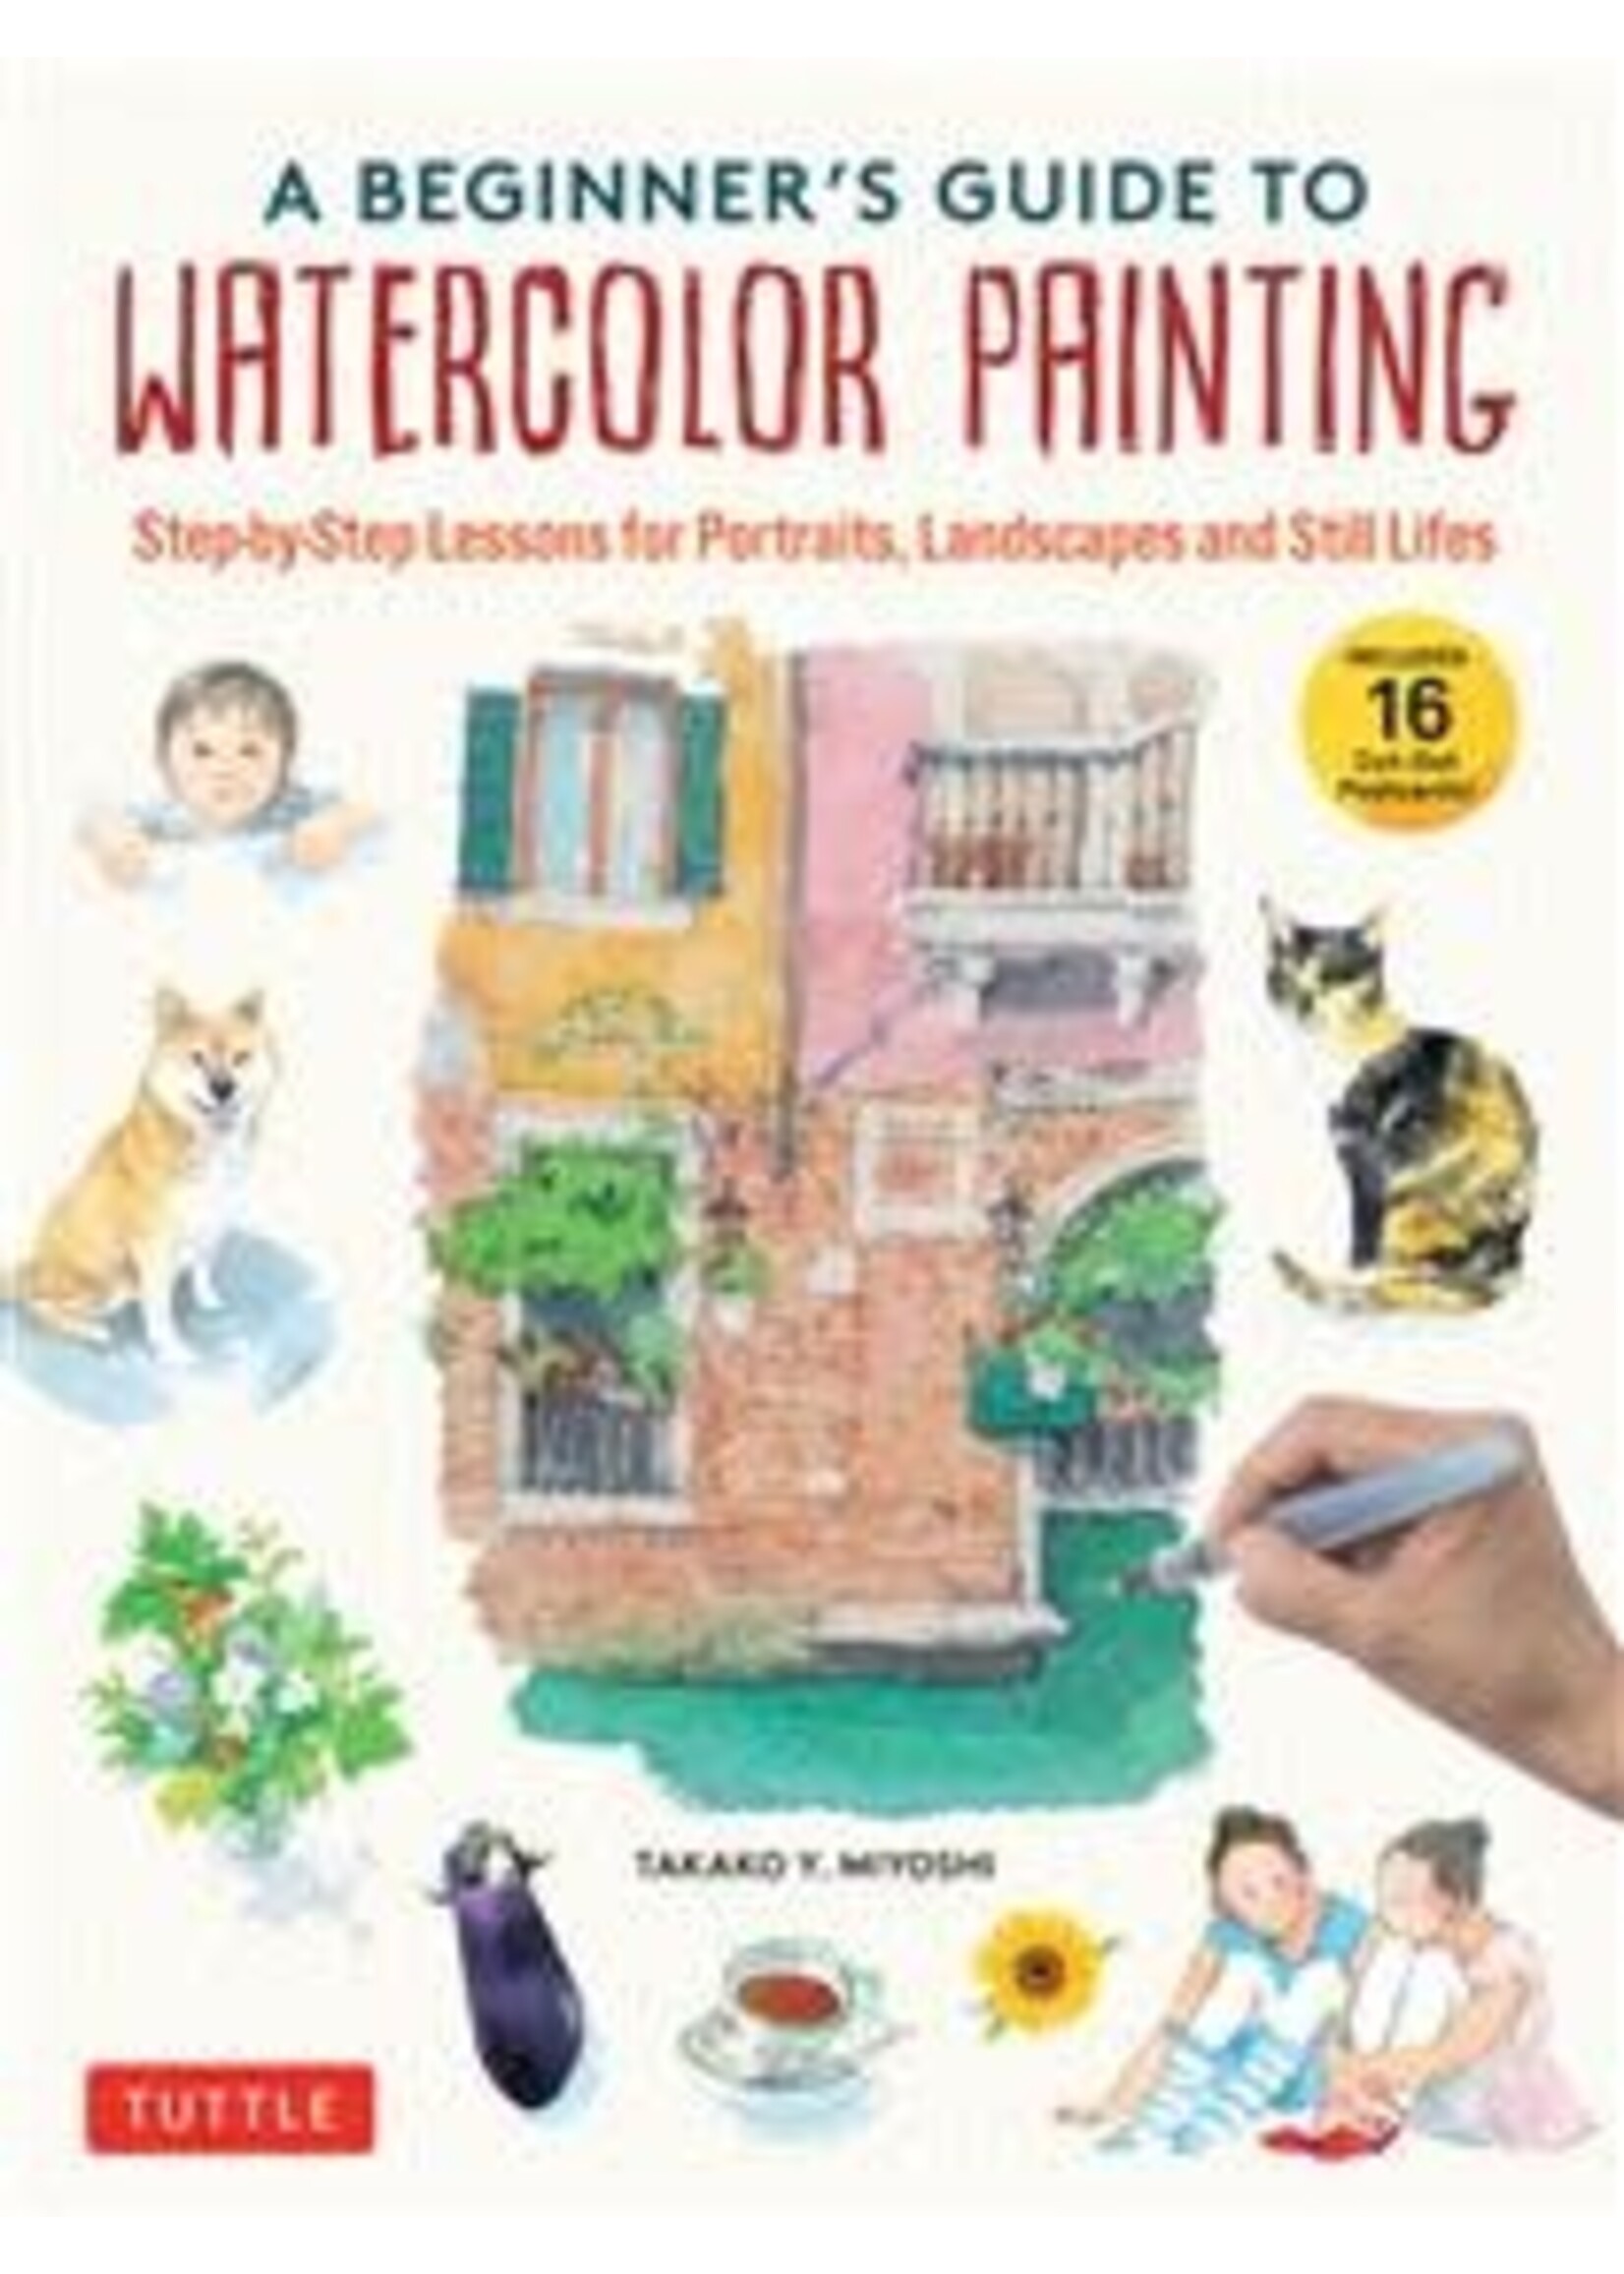 A Beginner's Guide to Watercolor: Painting Step-by-Step Lessons for Portraits, Landscapes and Still Lifes byTakako Y. Miyoshi